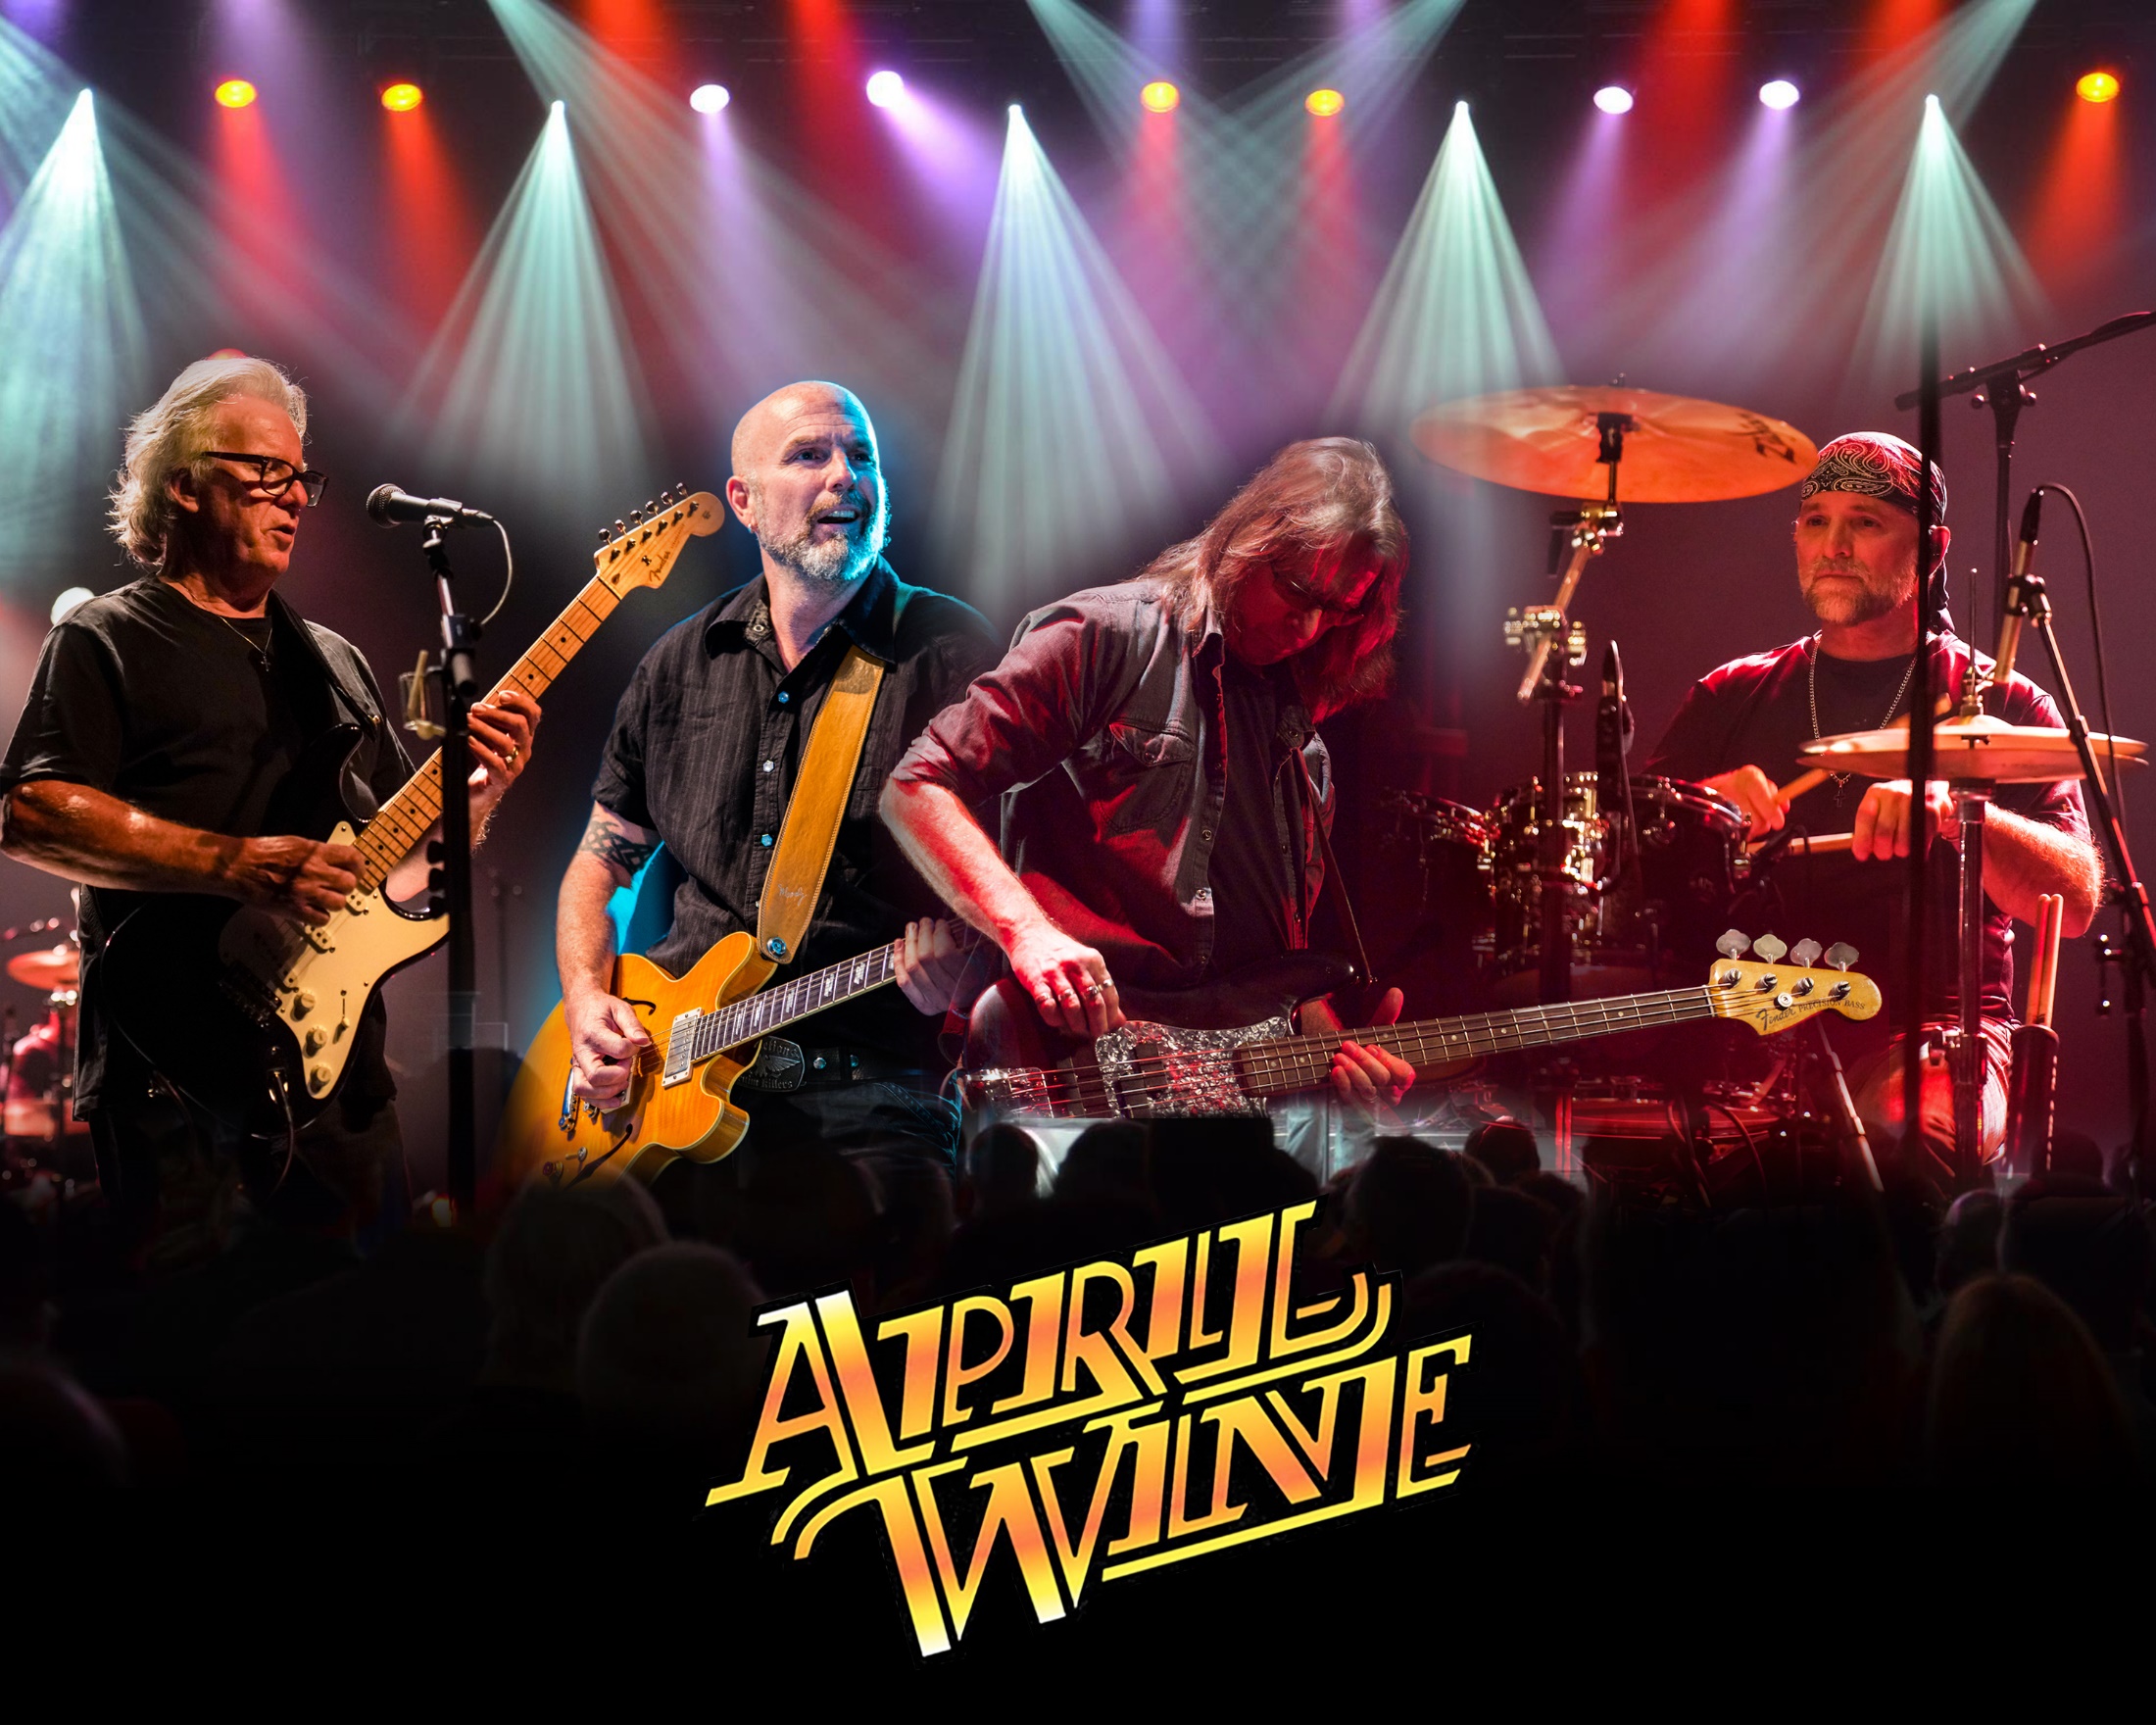 April Wine Founder And Singer Myles Goodwyn Announces Departure from